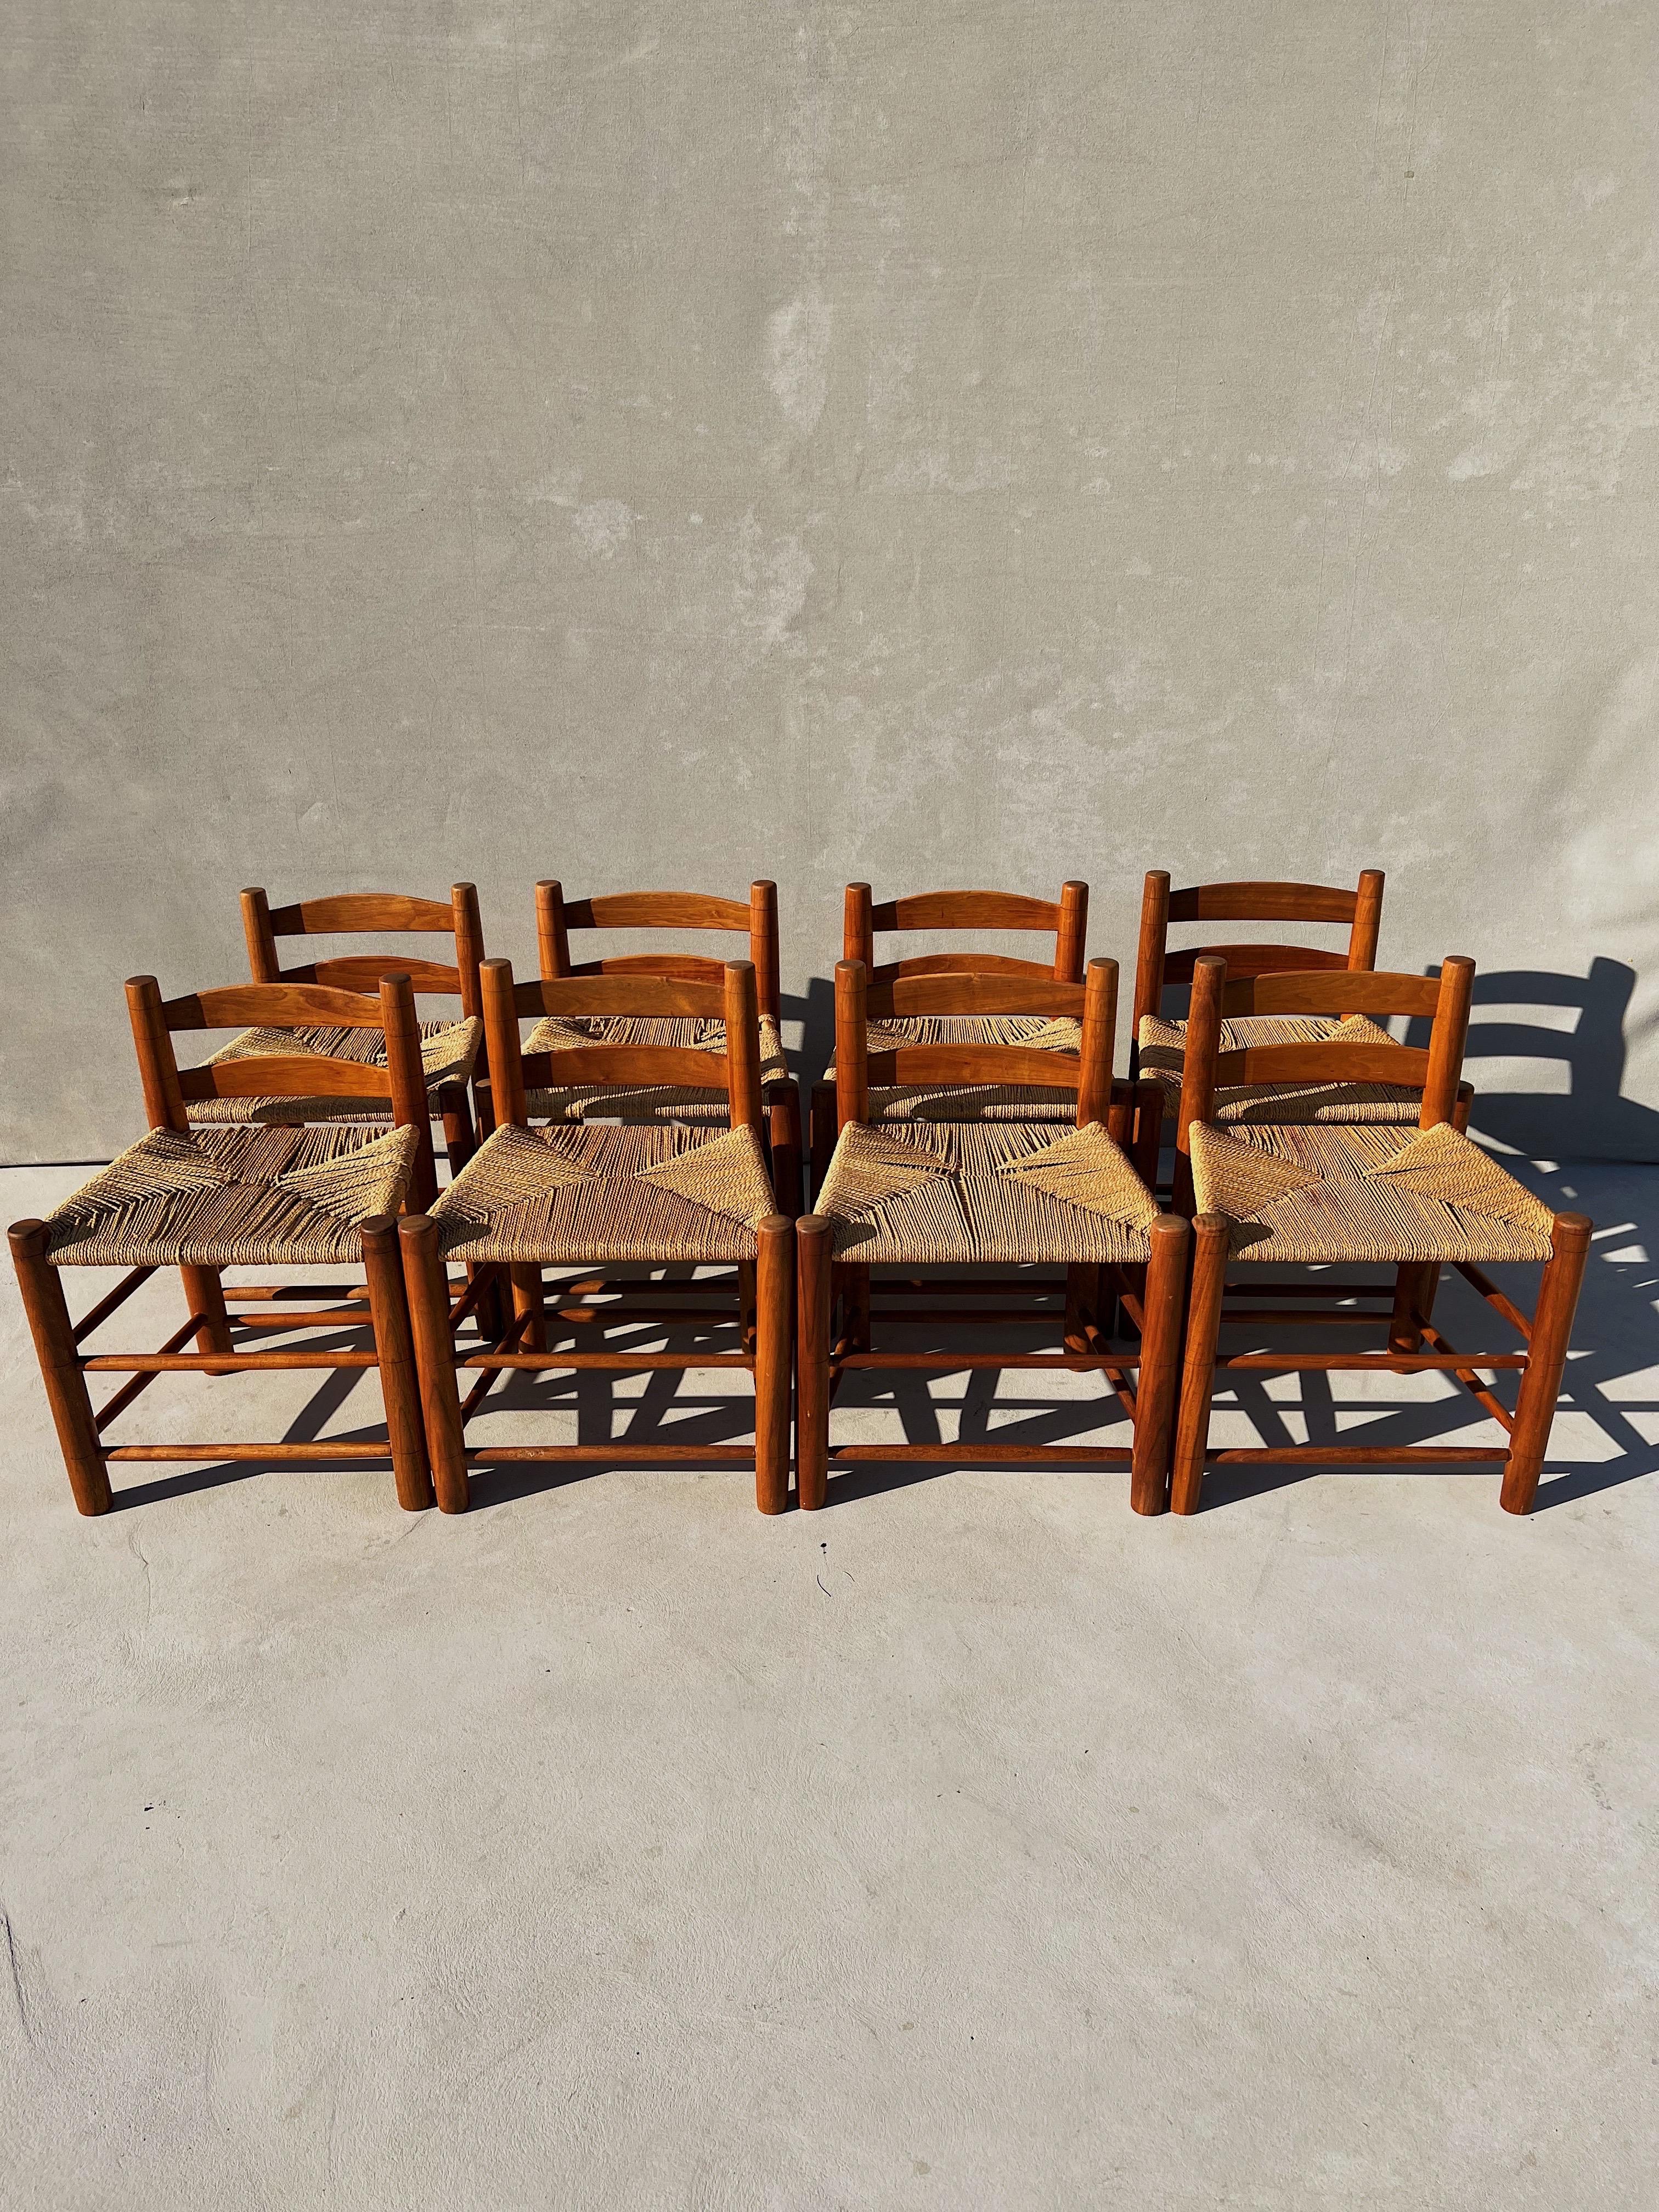 Vintage Walnut Wood & Woven Seats Dining Chairs, Set of 8 10